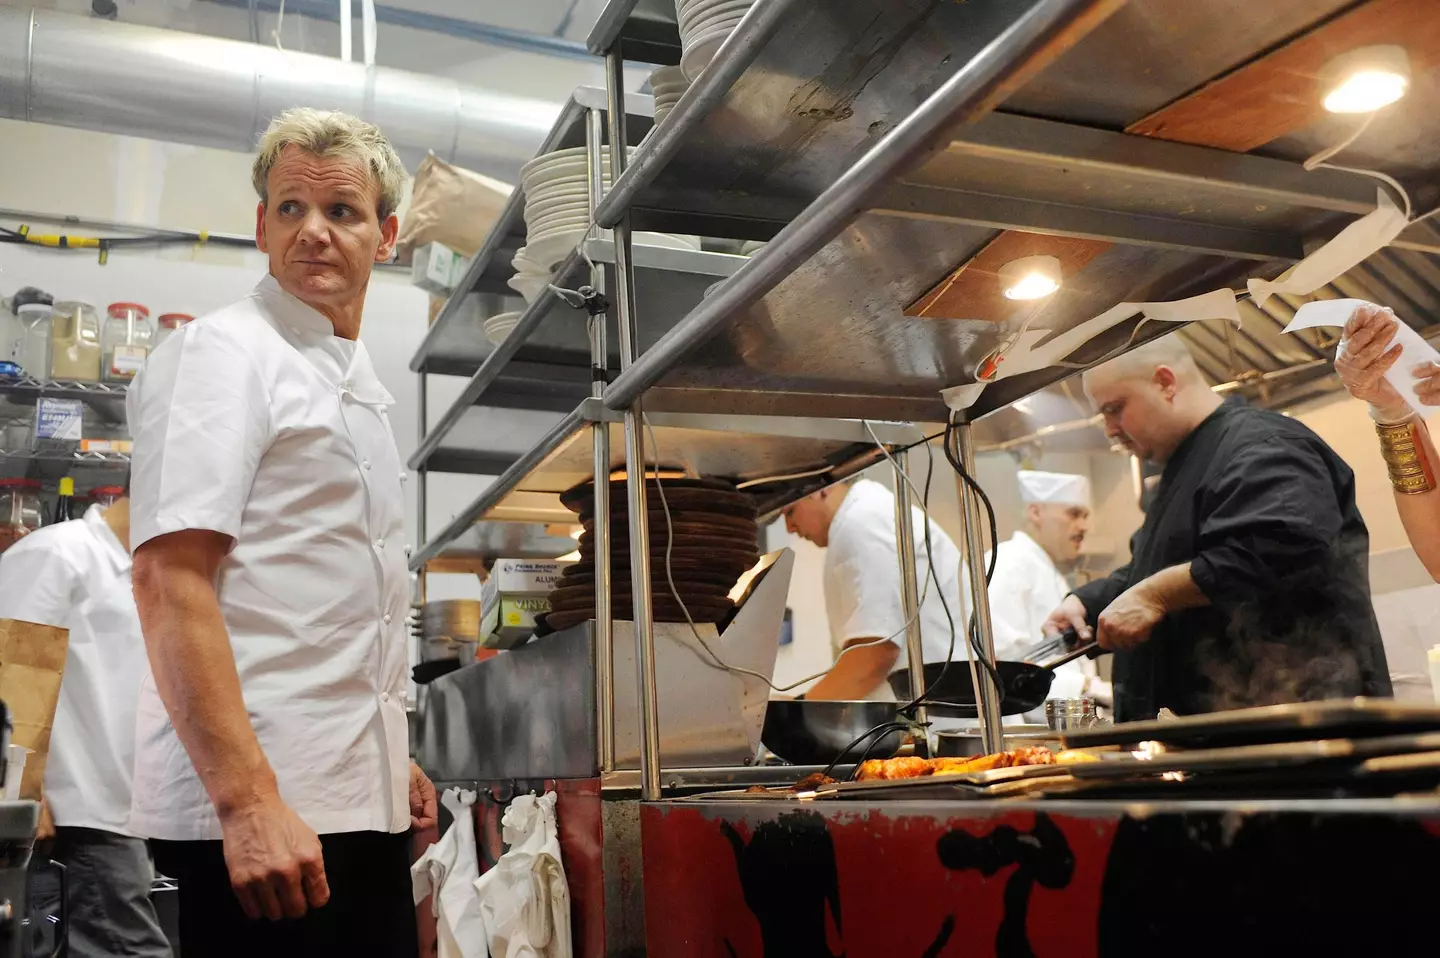 Gordon Ramsay could often be heard shouting to '86' something on Kitchen Nightmares.